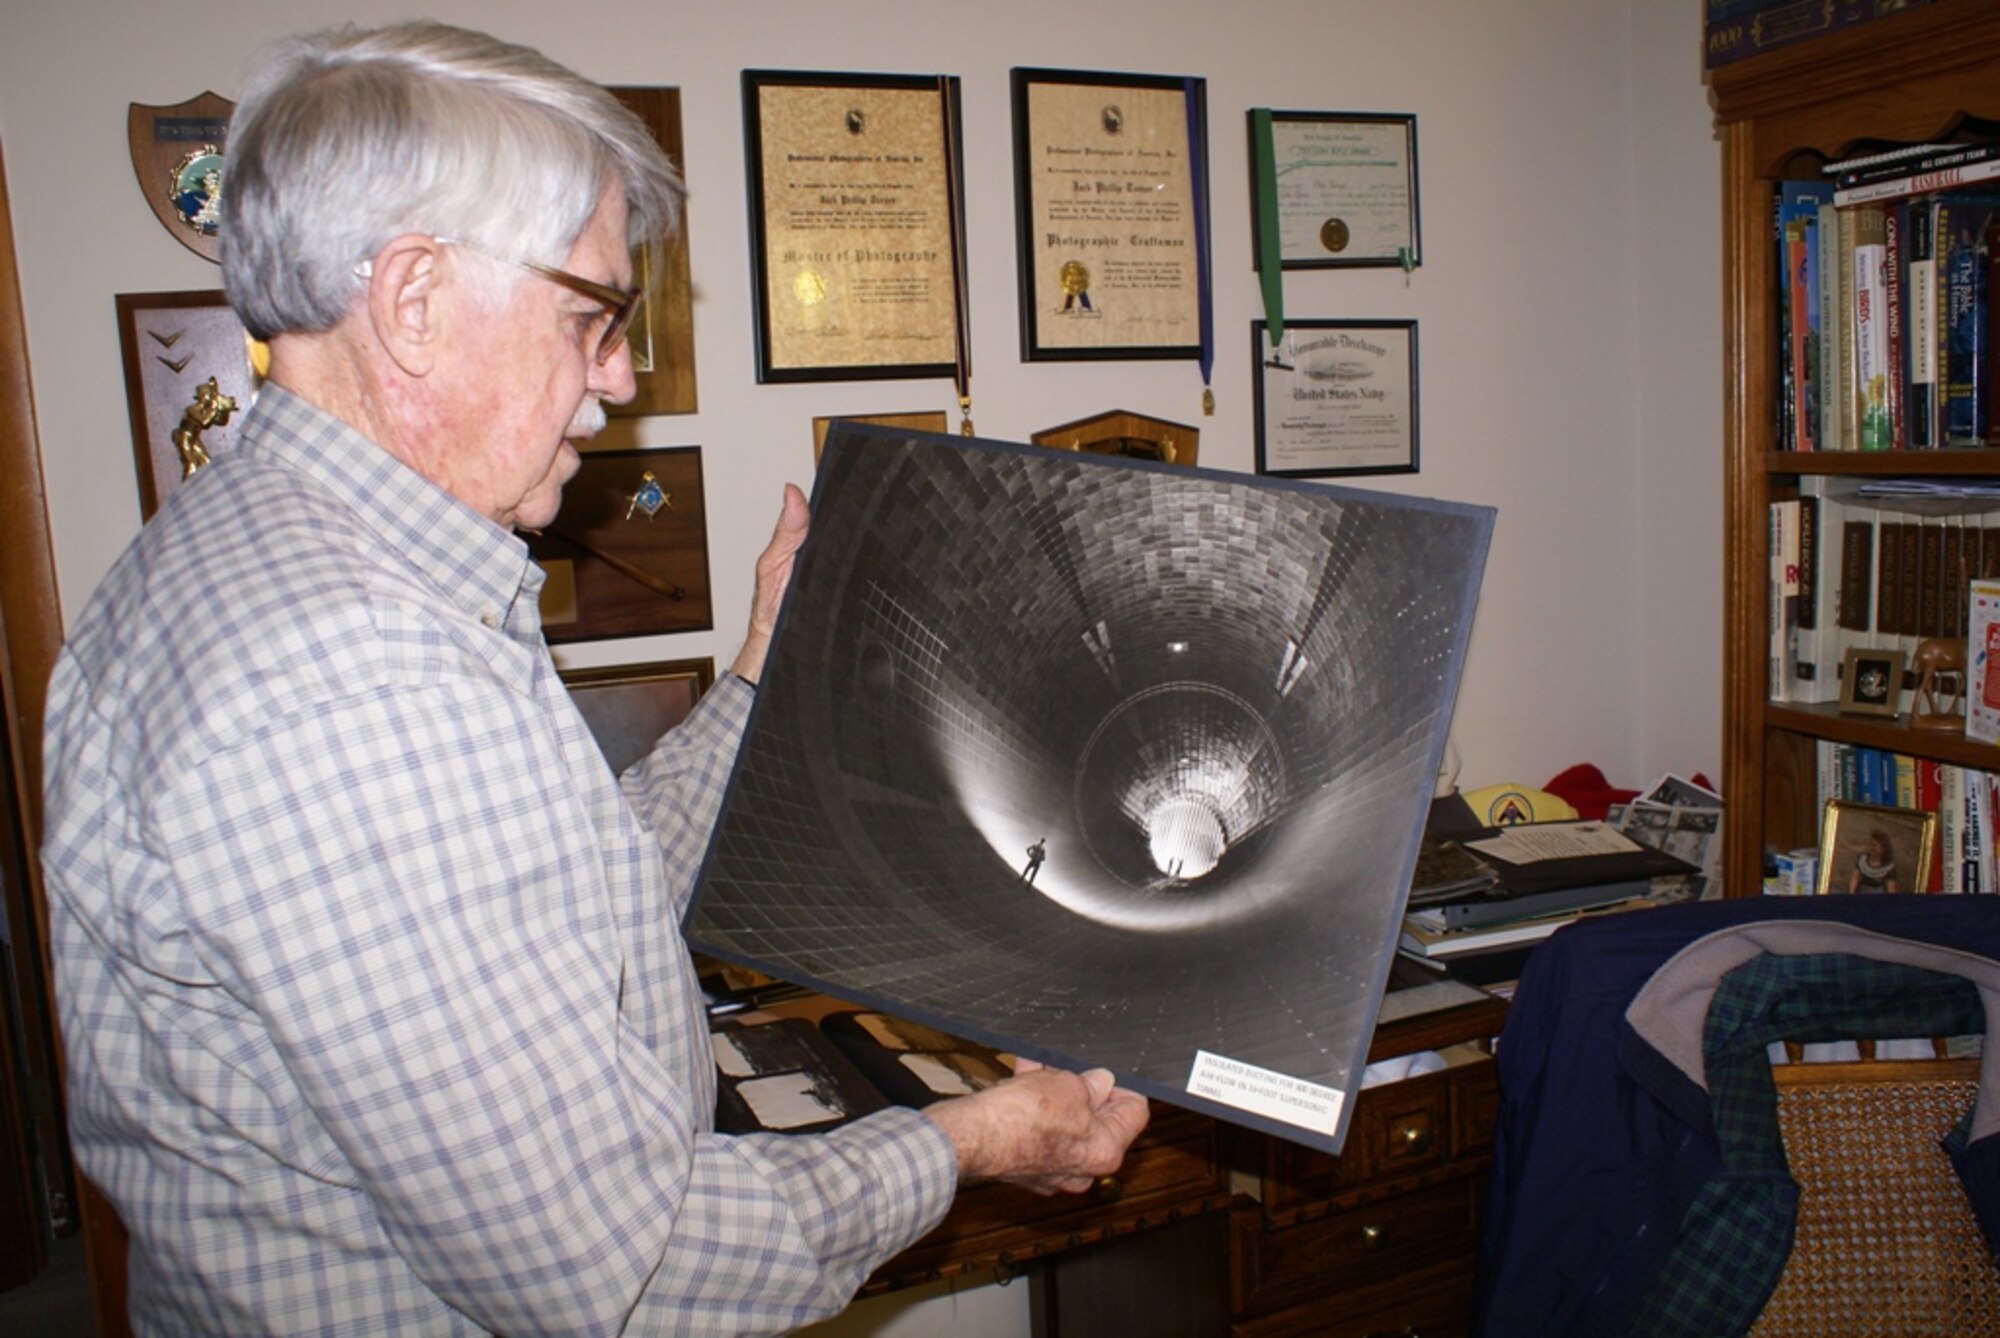 Phil Tarver holds a 16 by 20 inch black and white photographic print of the iconic image seen on AEDC’s Web site of three men, from left, Charlie Powell, in foreground, R. Pierson Smith and Bob Bomar, standing on turning vanes inside AEDC’s 16-foot supersonic wind tunnel test facility. (Photo by Philip Lorenz III)